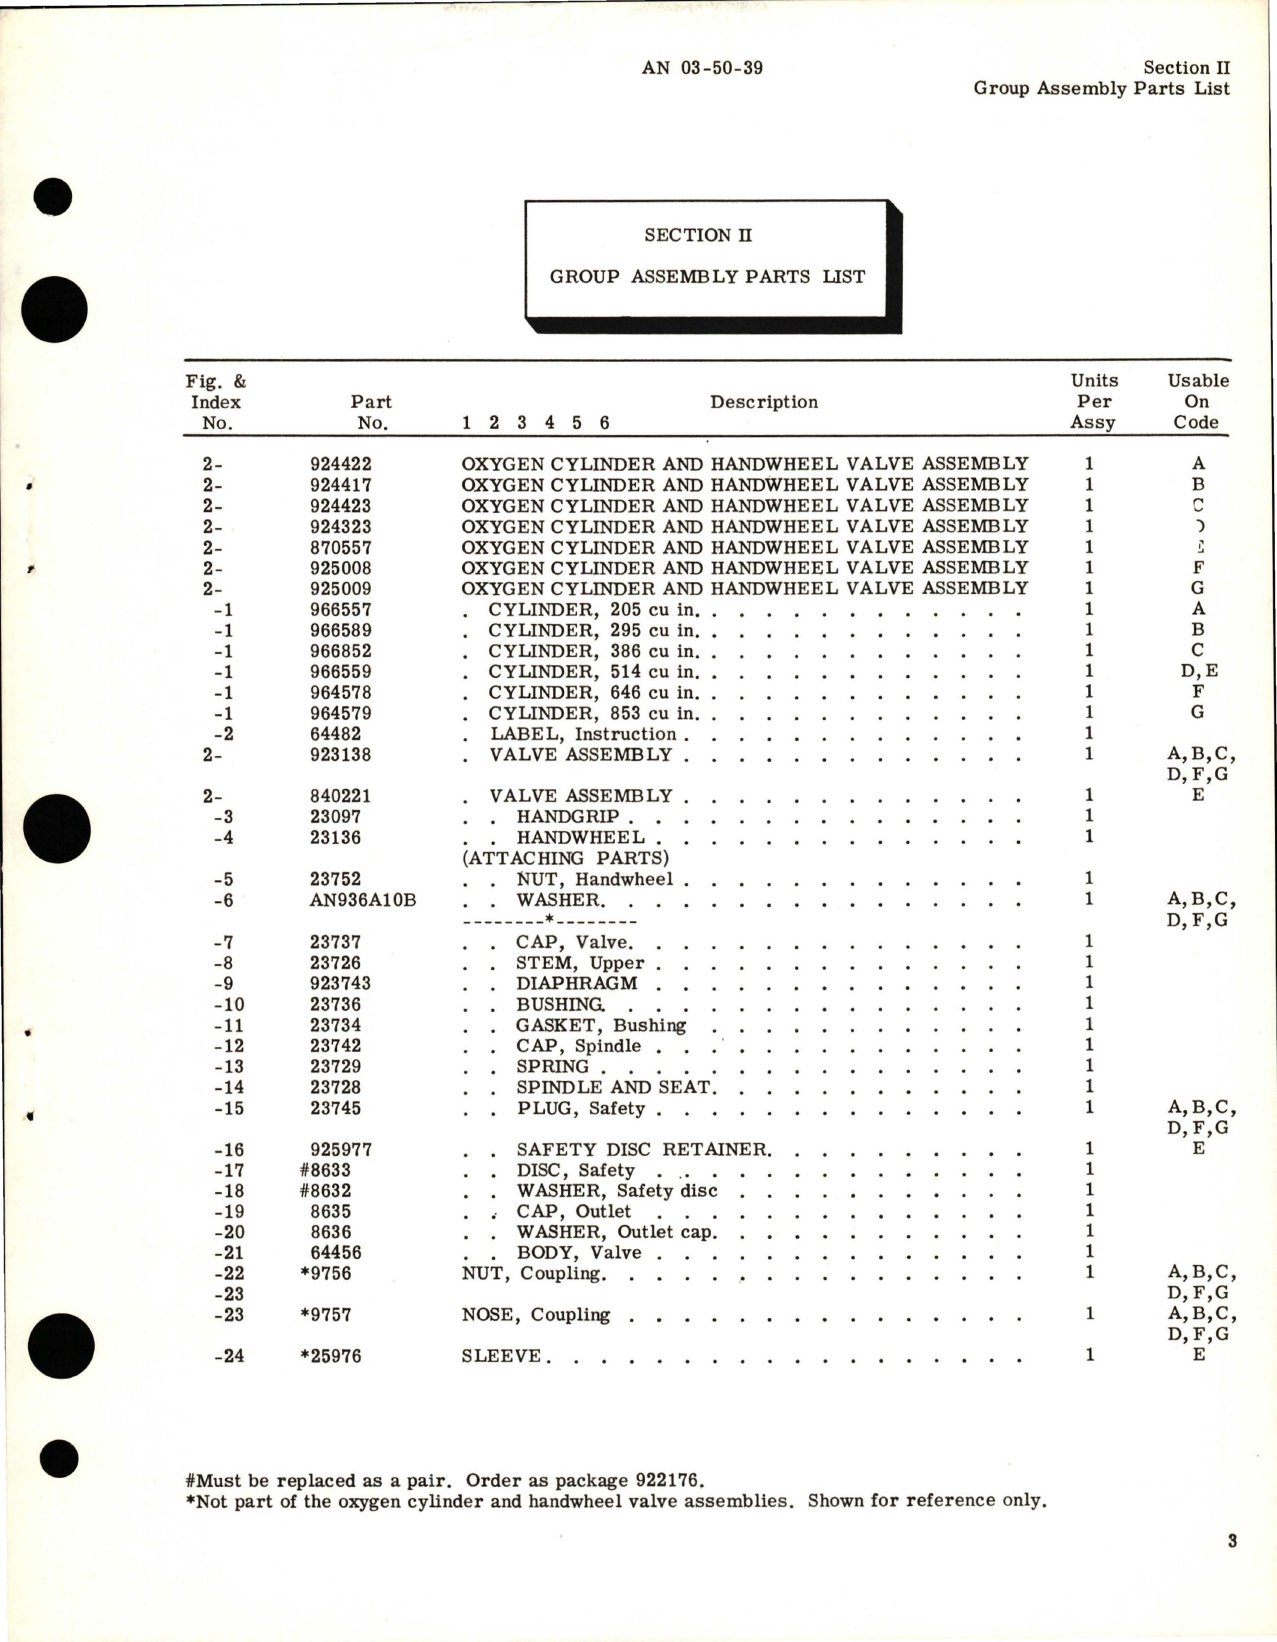 Sample page 5 from AirCorps Library document: Illustrated Parts Breakdown for Oxygen Cylinder and Handwheel Valve Assembly